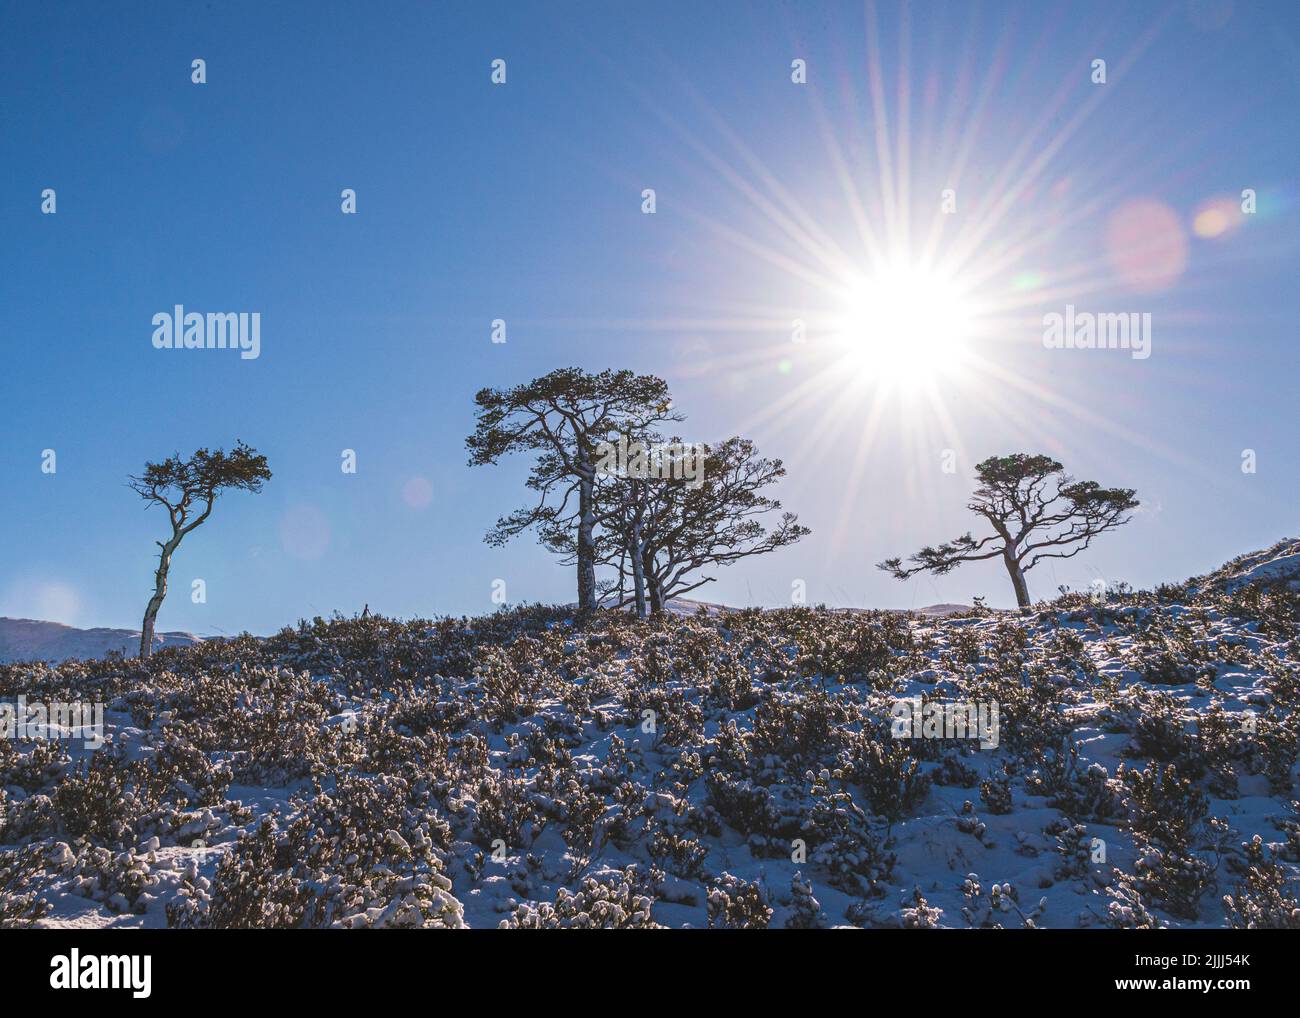 The morning sun backlighting Scots Pines, a frosty heathery hill in the fore, looking up to a blue sky. Stock Photo